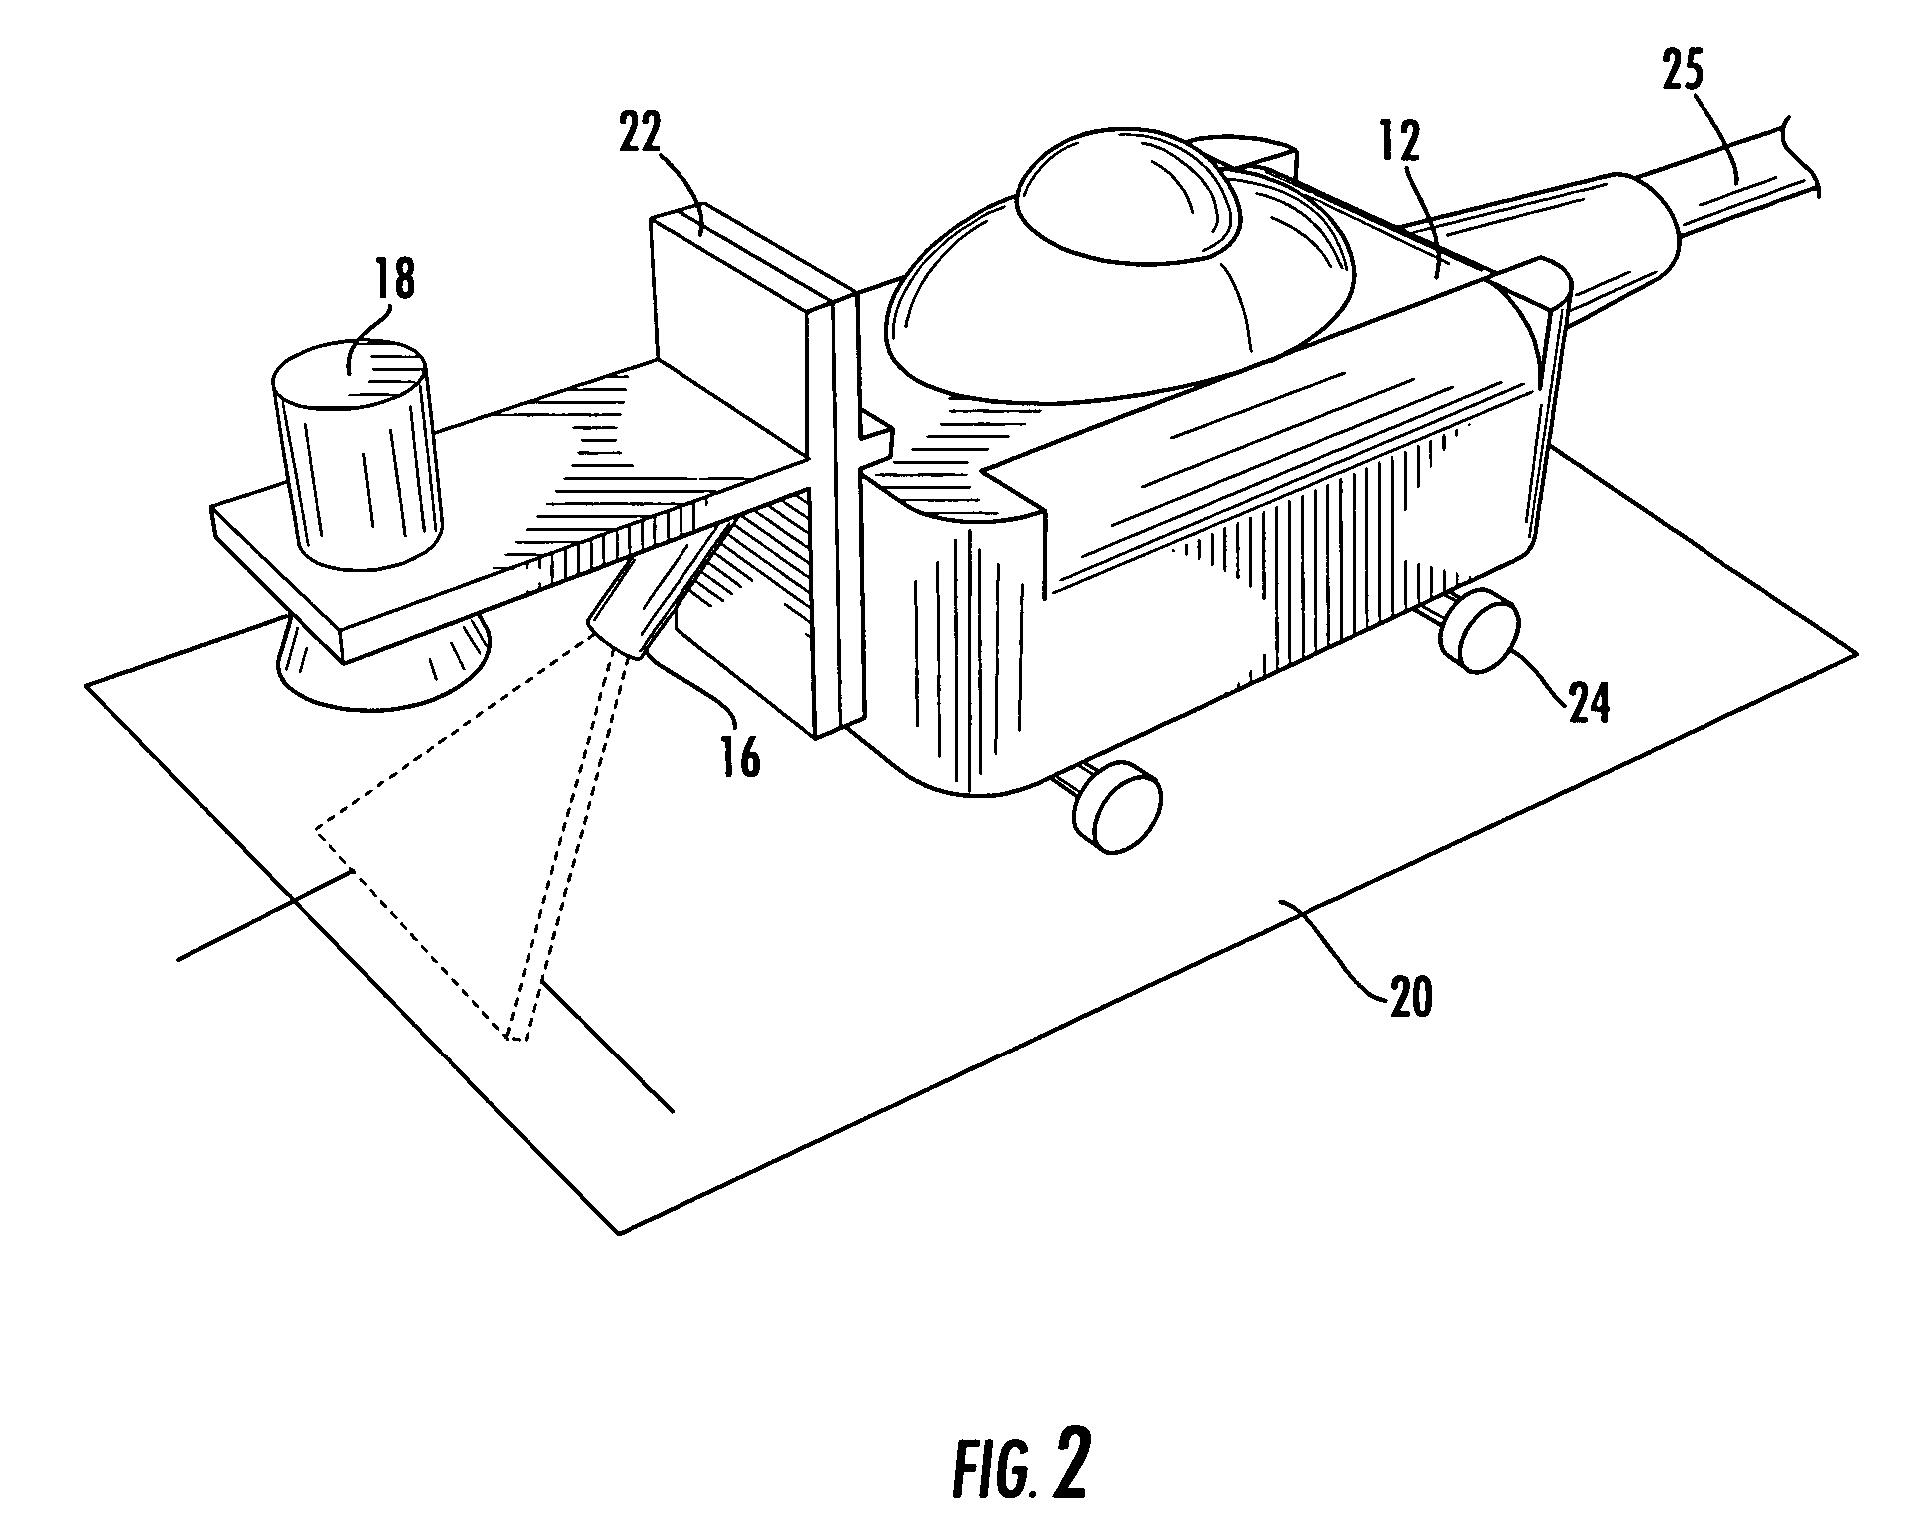 Non-destructive inspection using laser profiling and associated method